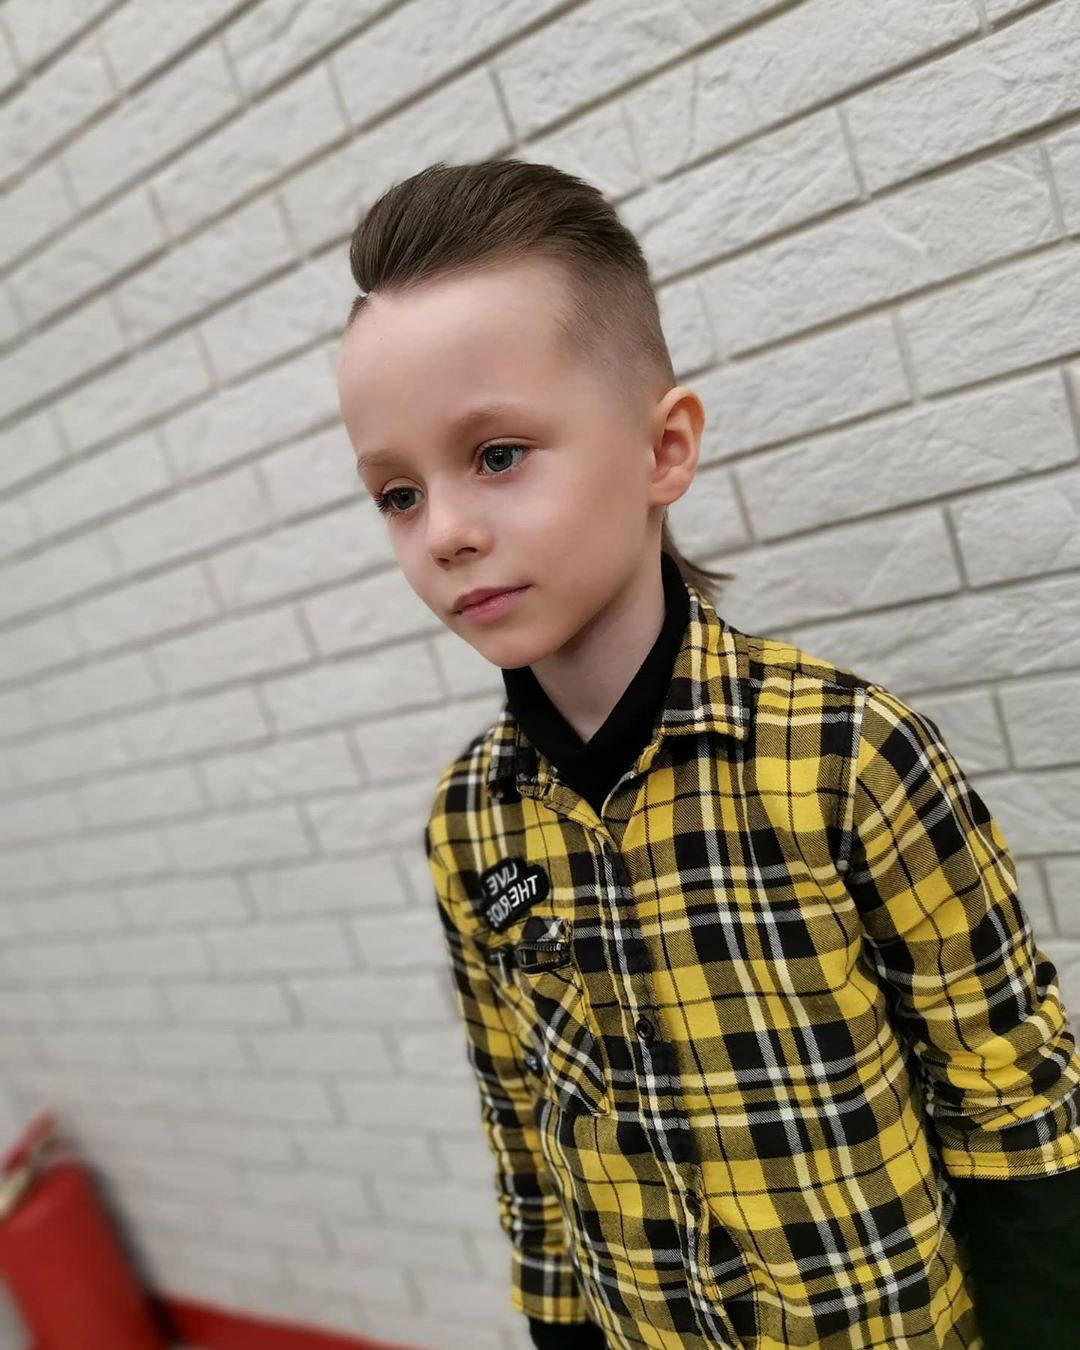 50+ Cool Undercut Designs for Boys: Look Stylish Since Small Age